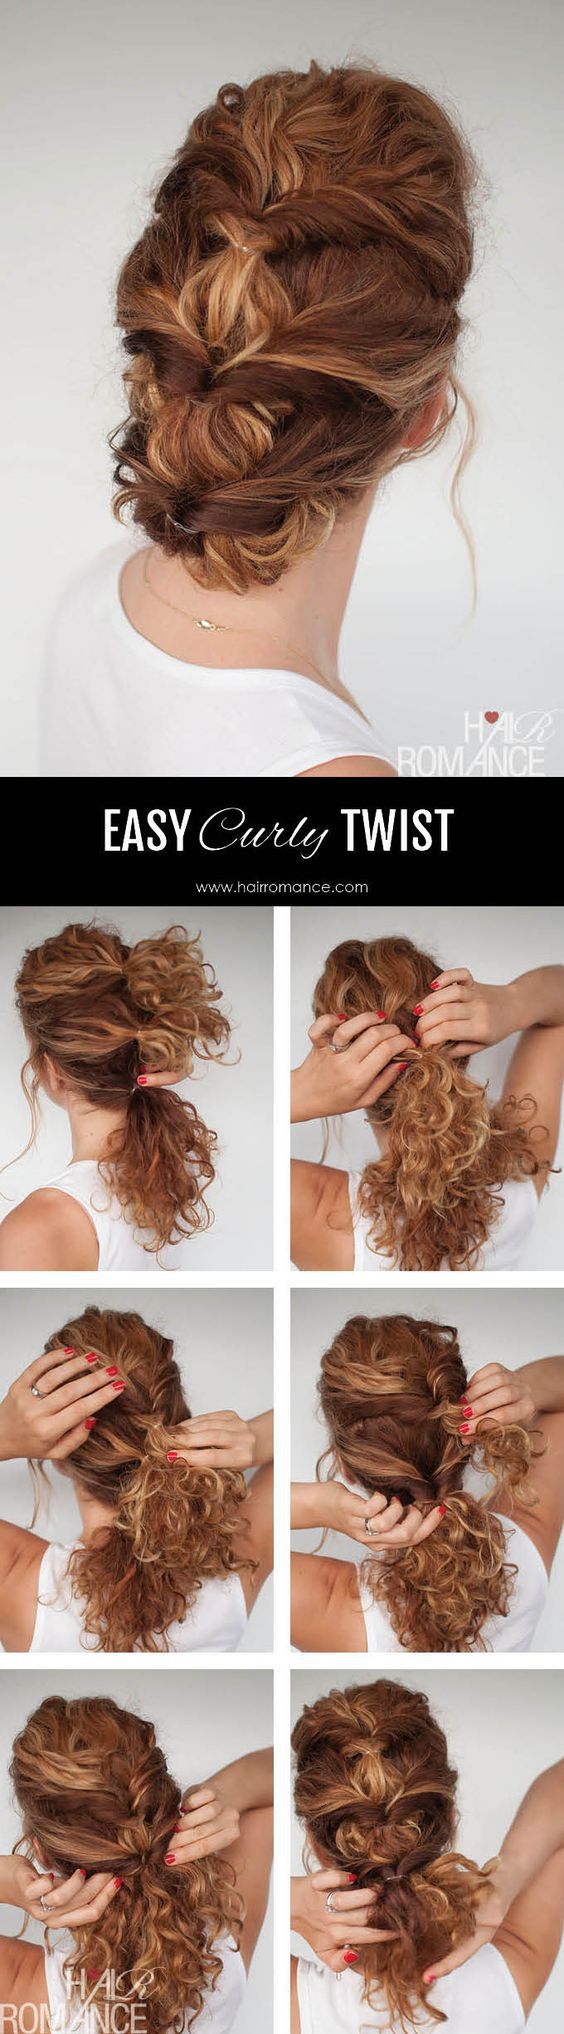 7 Easy Everyday Hairstyles for Long Hair | Hairstyles For Girls With Long  Hair - Makeupandbeauty.com